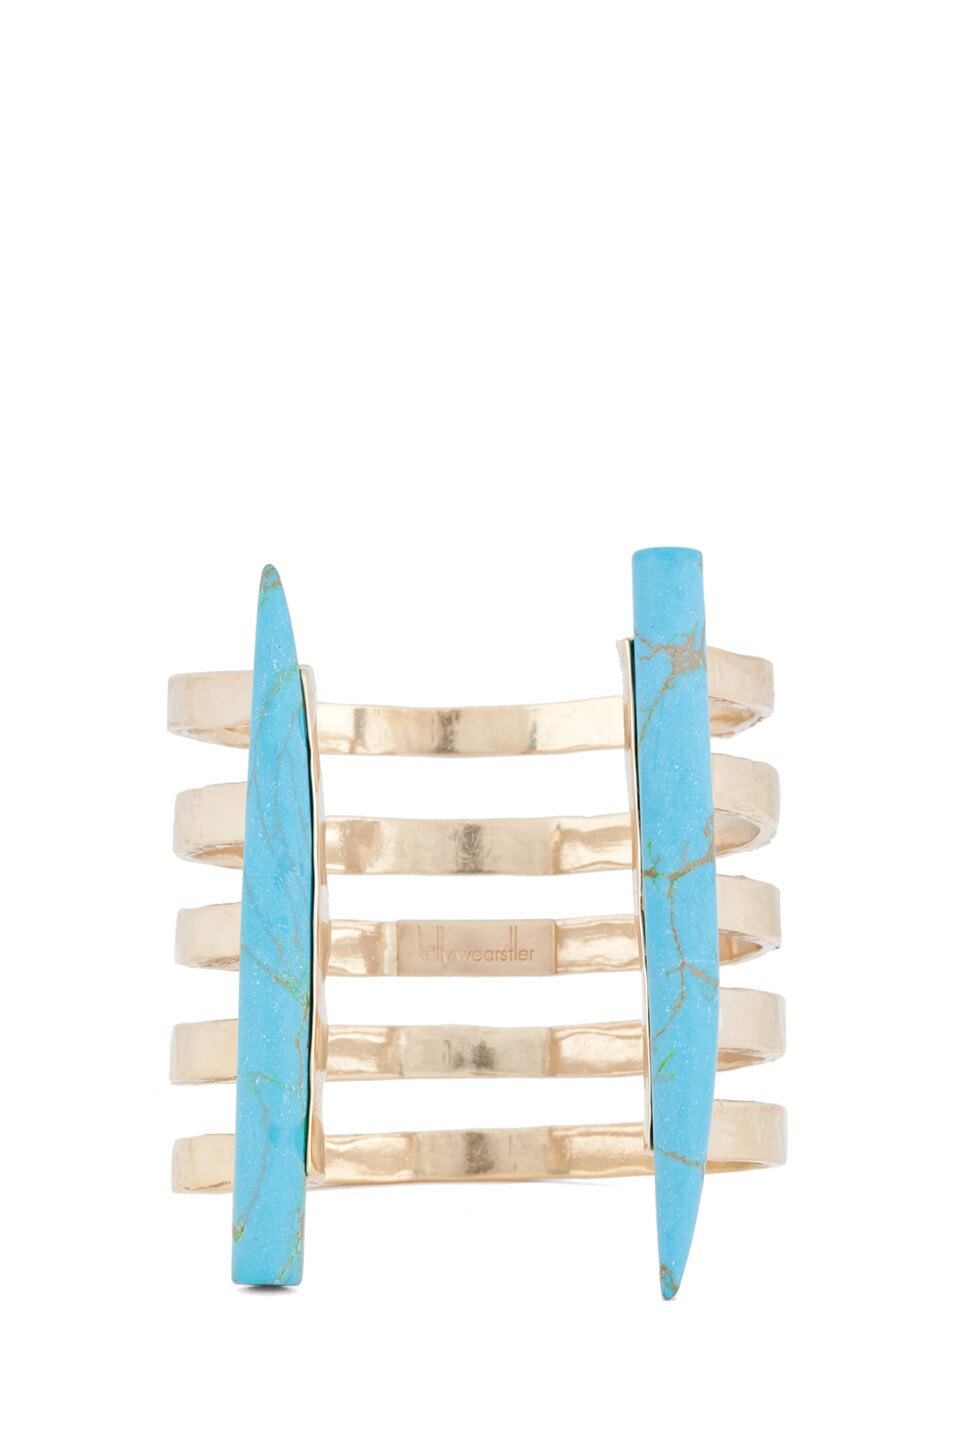 Image 1 of Kelly Wearstler Banded Horn Cuff in Turquoise